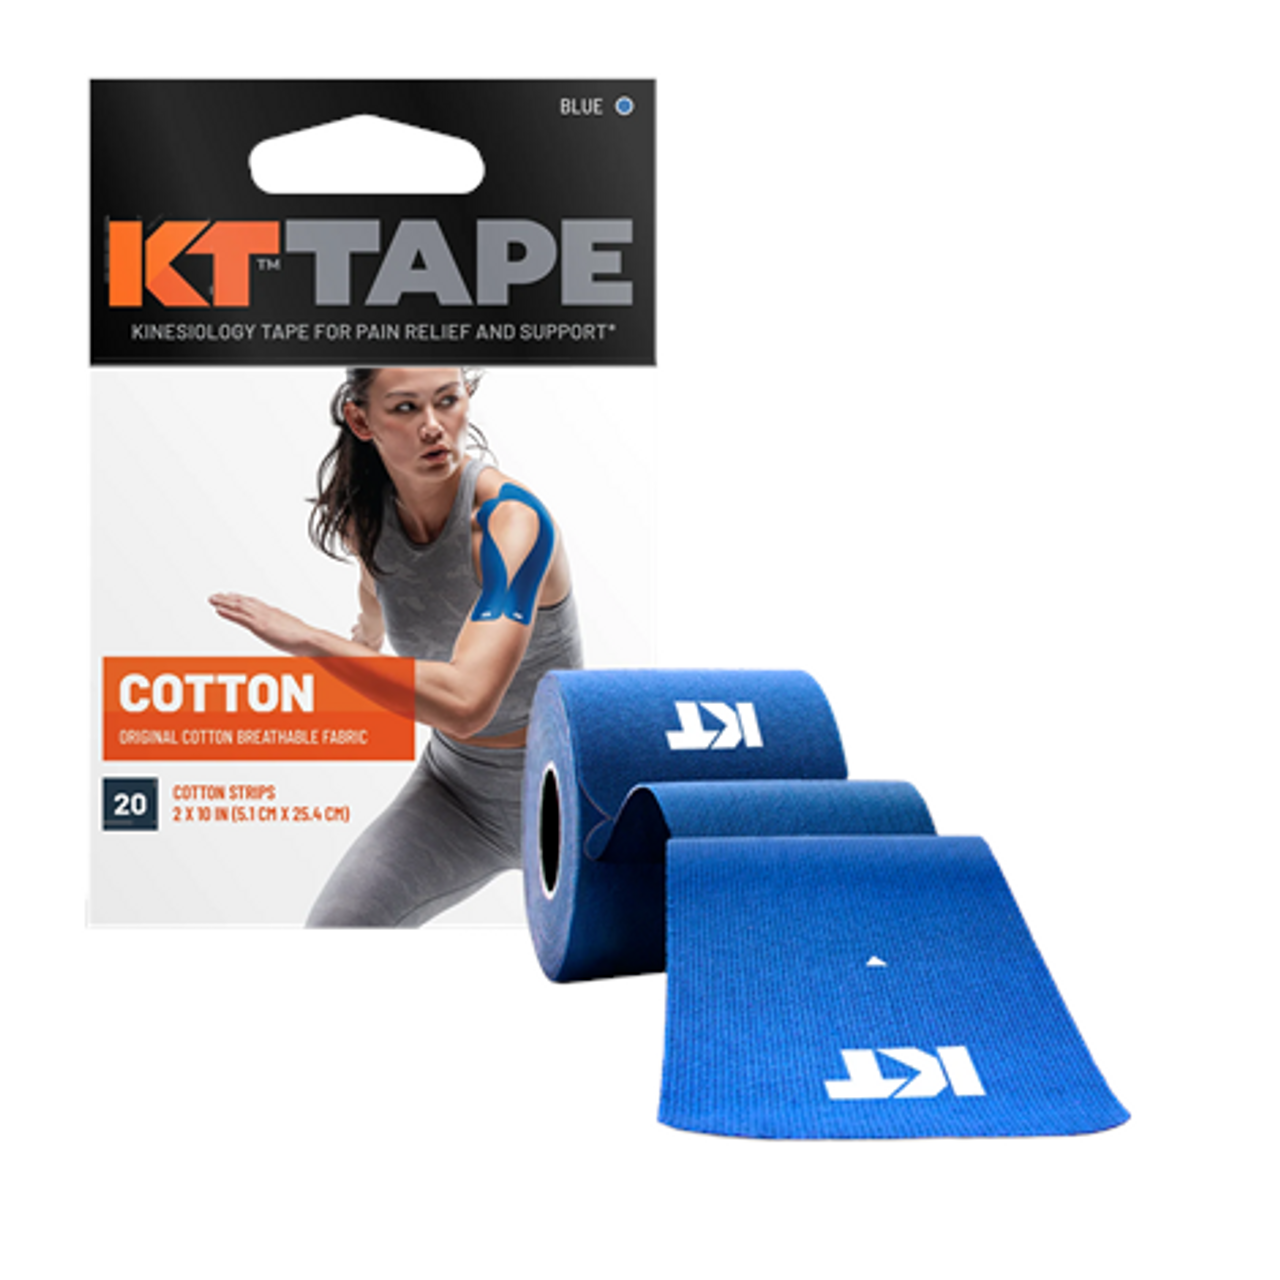 USOPC extends partnership with KT Tape